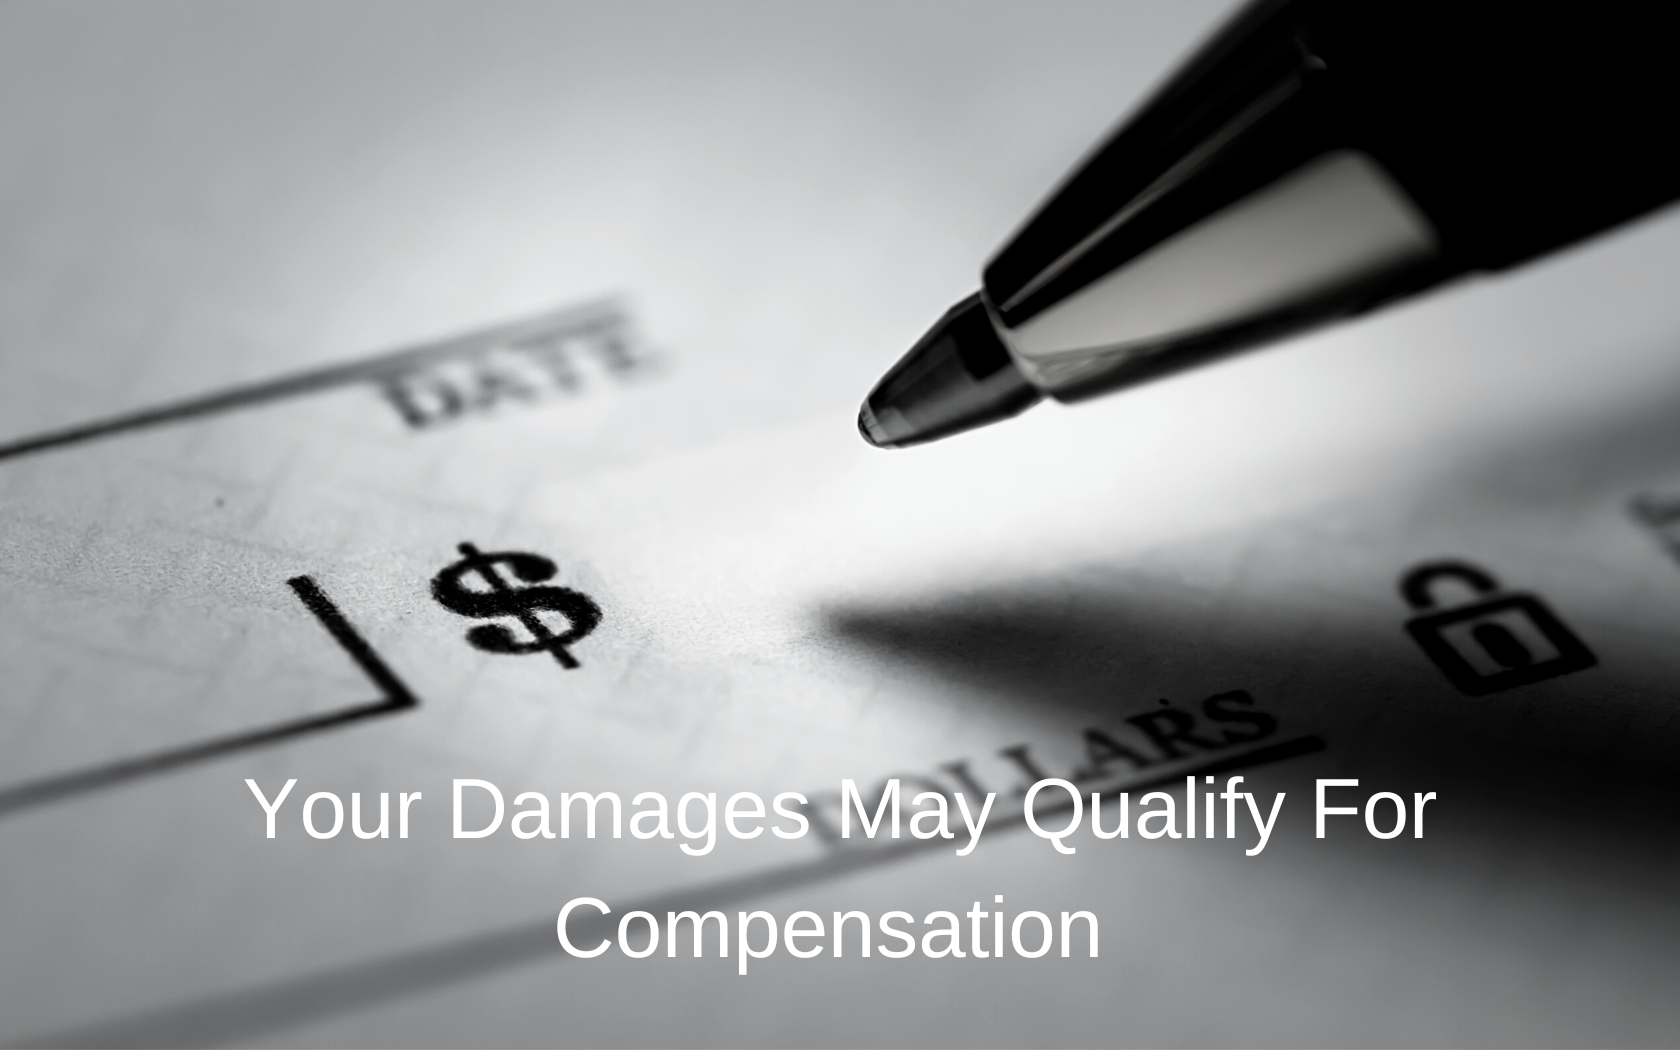 Writing check for pain and suffering damages.